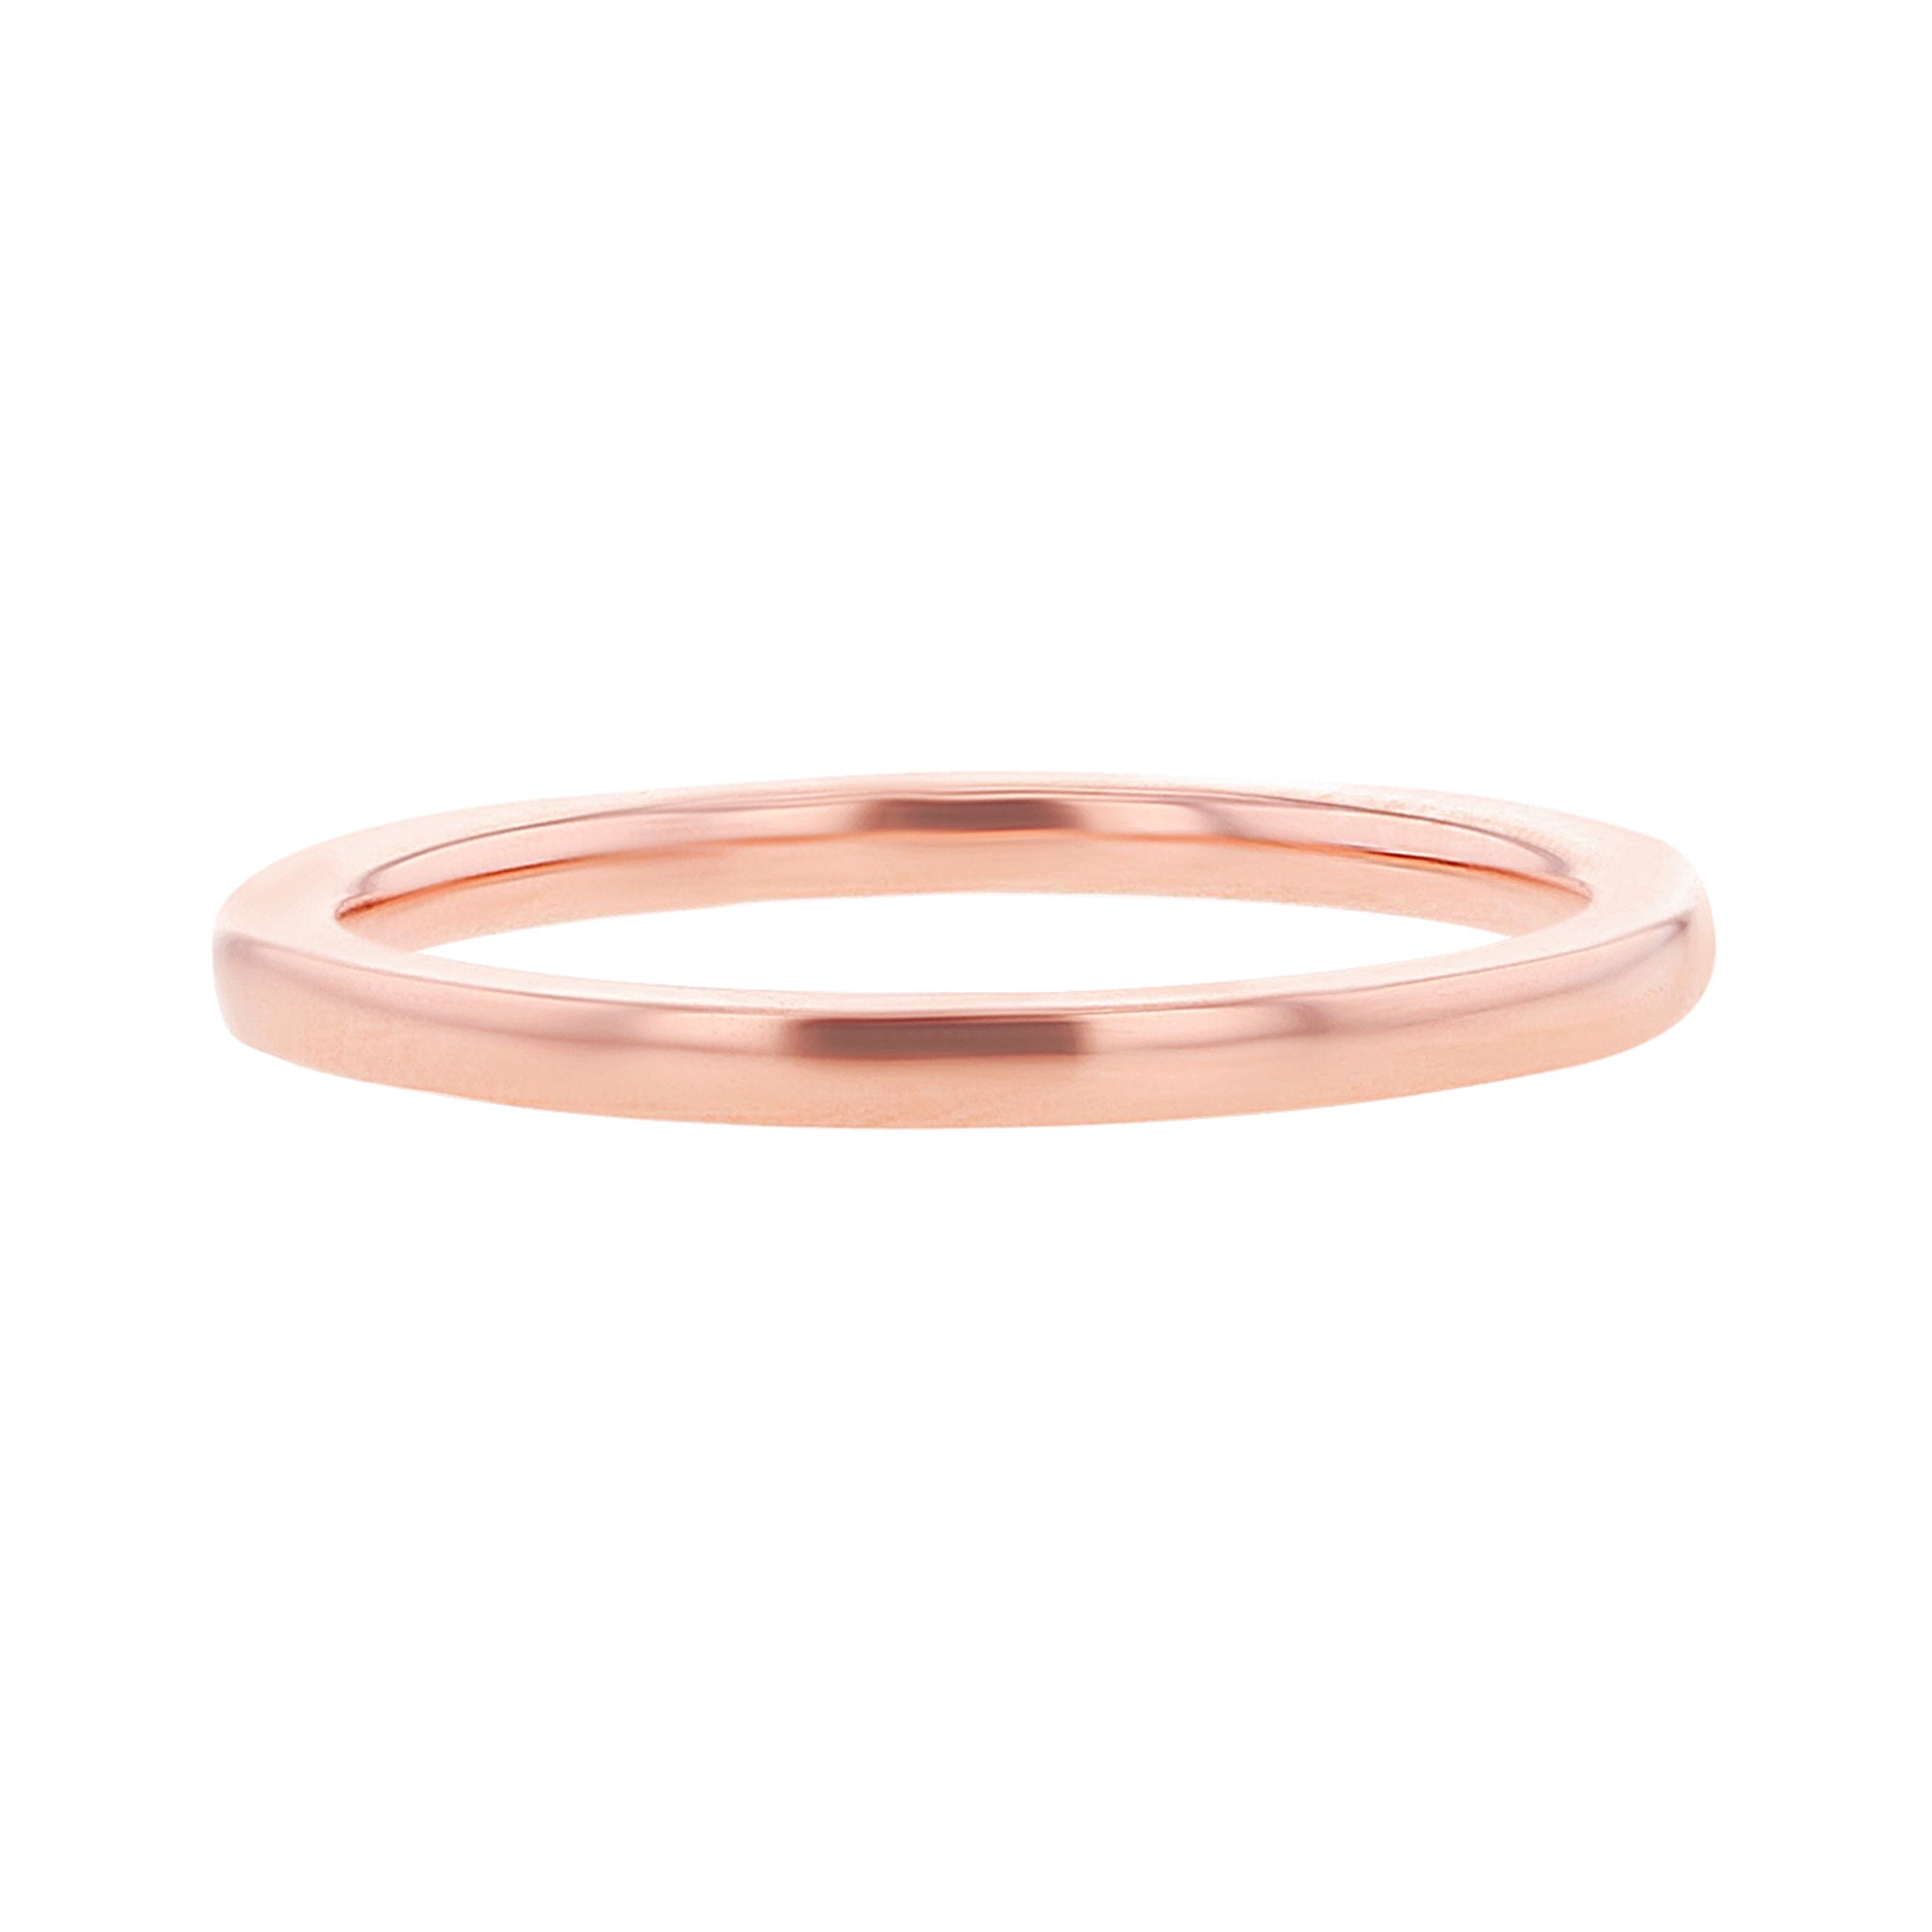 Roux 1.5 mm Light Low Dome Wedding Ring